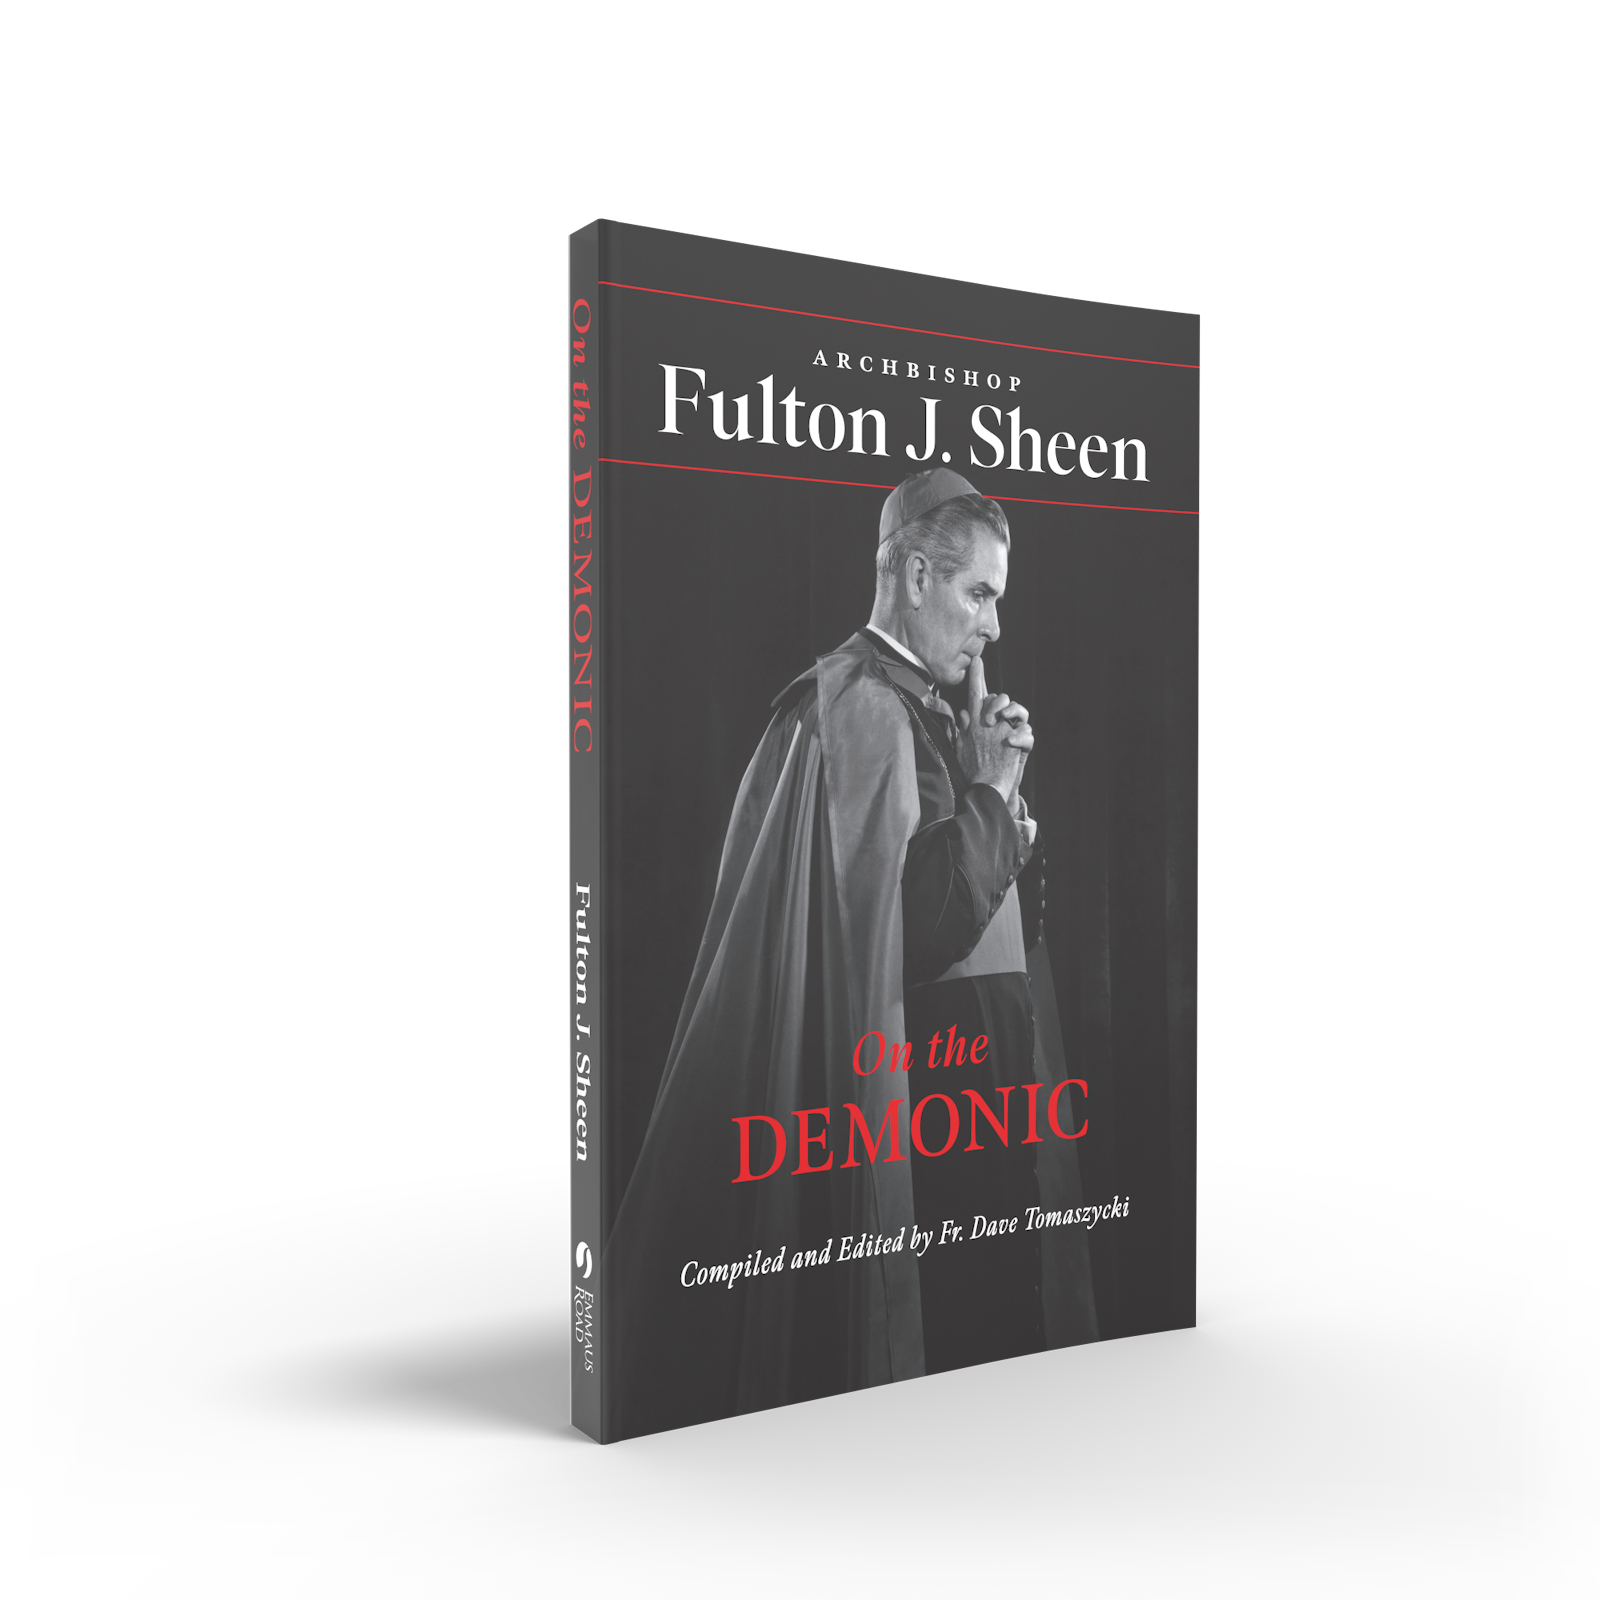 The cover of "On the Demonic," a collection of teachings, writings and talks by Venerable Archbishop Fulton J. Sheen compiled and edited by Fr. David Tomaszycki, a priest of the Archdiocese of Detroit.